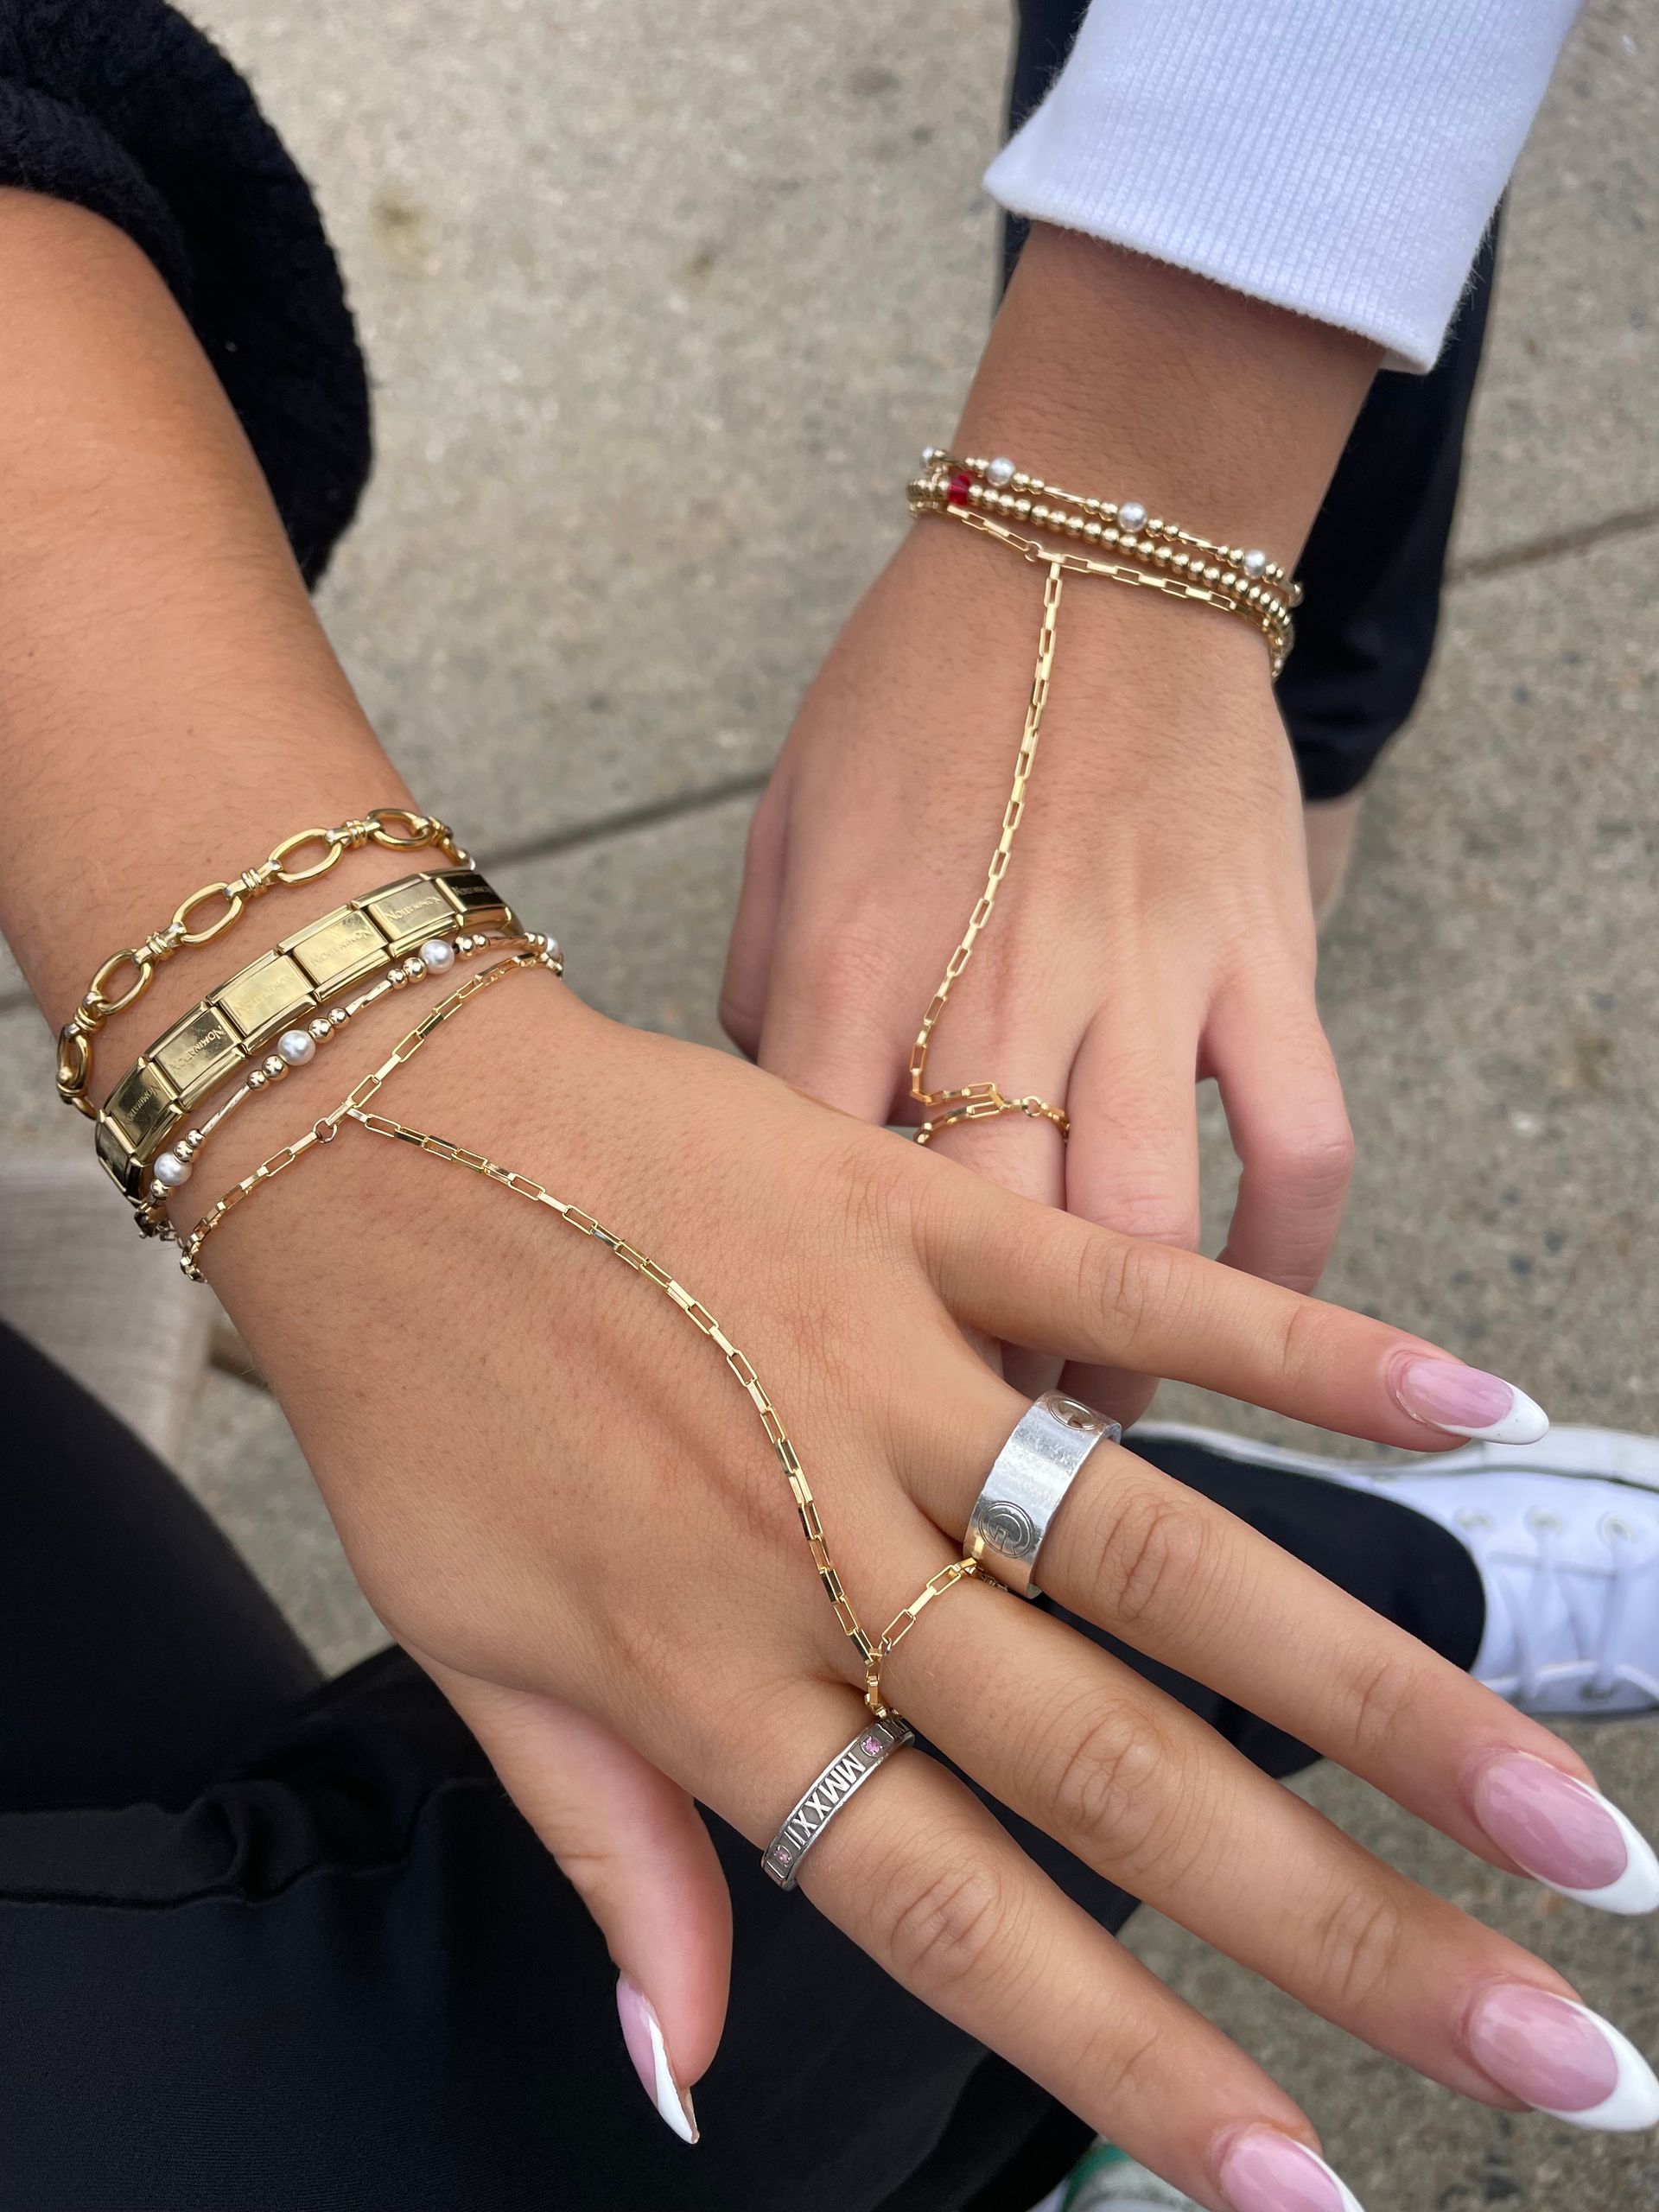 Private Permanent Jewelry Party: Make Lasting Memories, Bond with Your Friends & Have Beautiful Permanent Bracelets from Your Special Weekend image 1